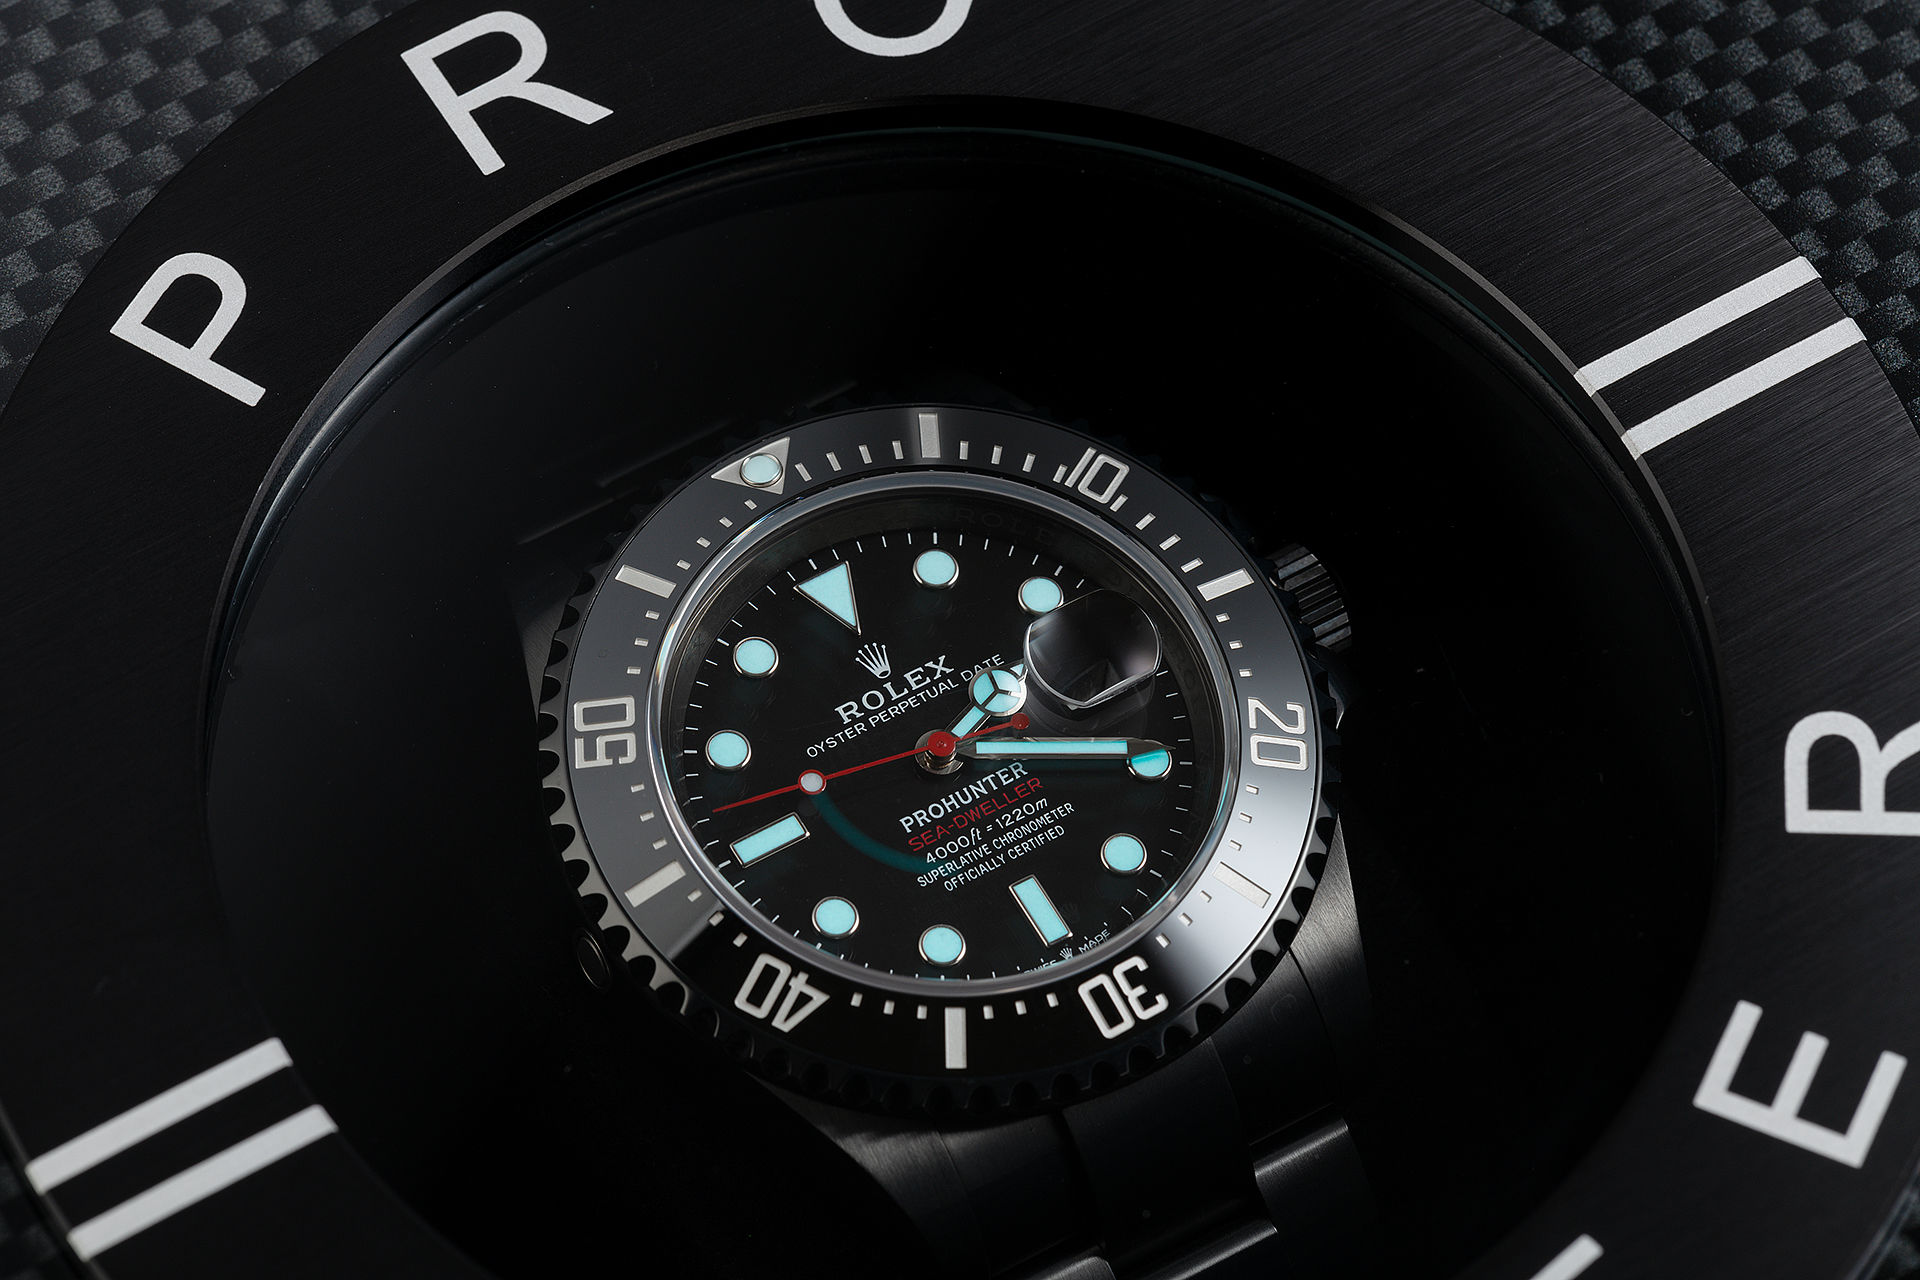 ref 126600 | New 'Red Writing' One of 100 | Pro Hunter Sea-Dweller